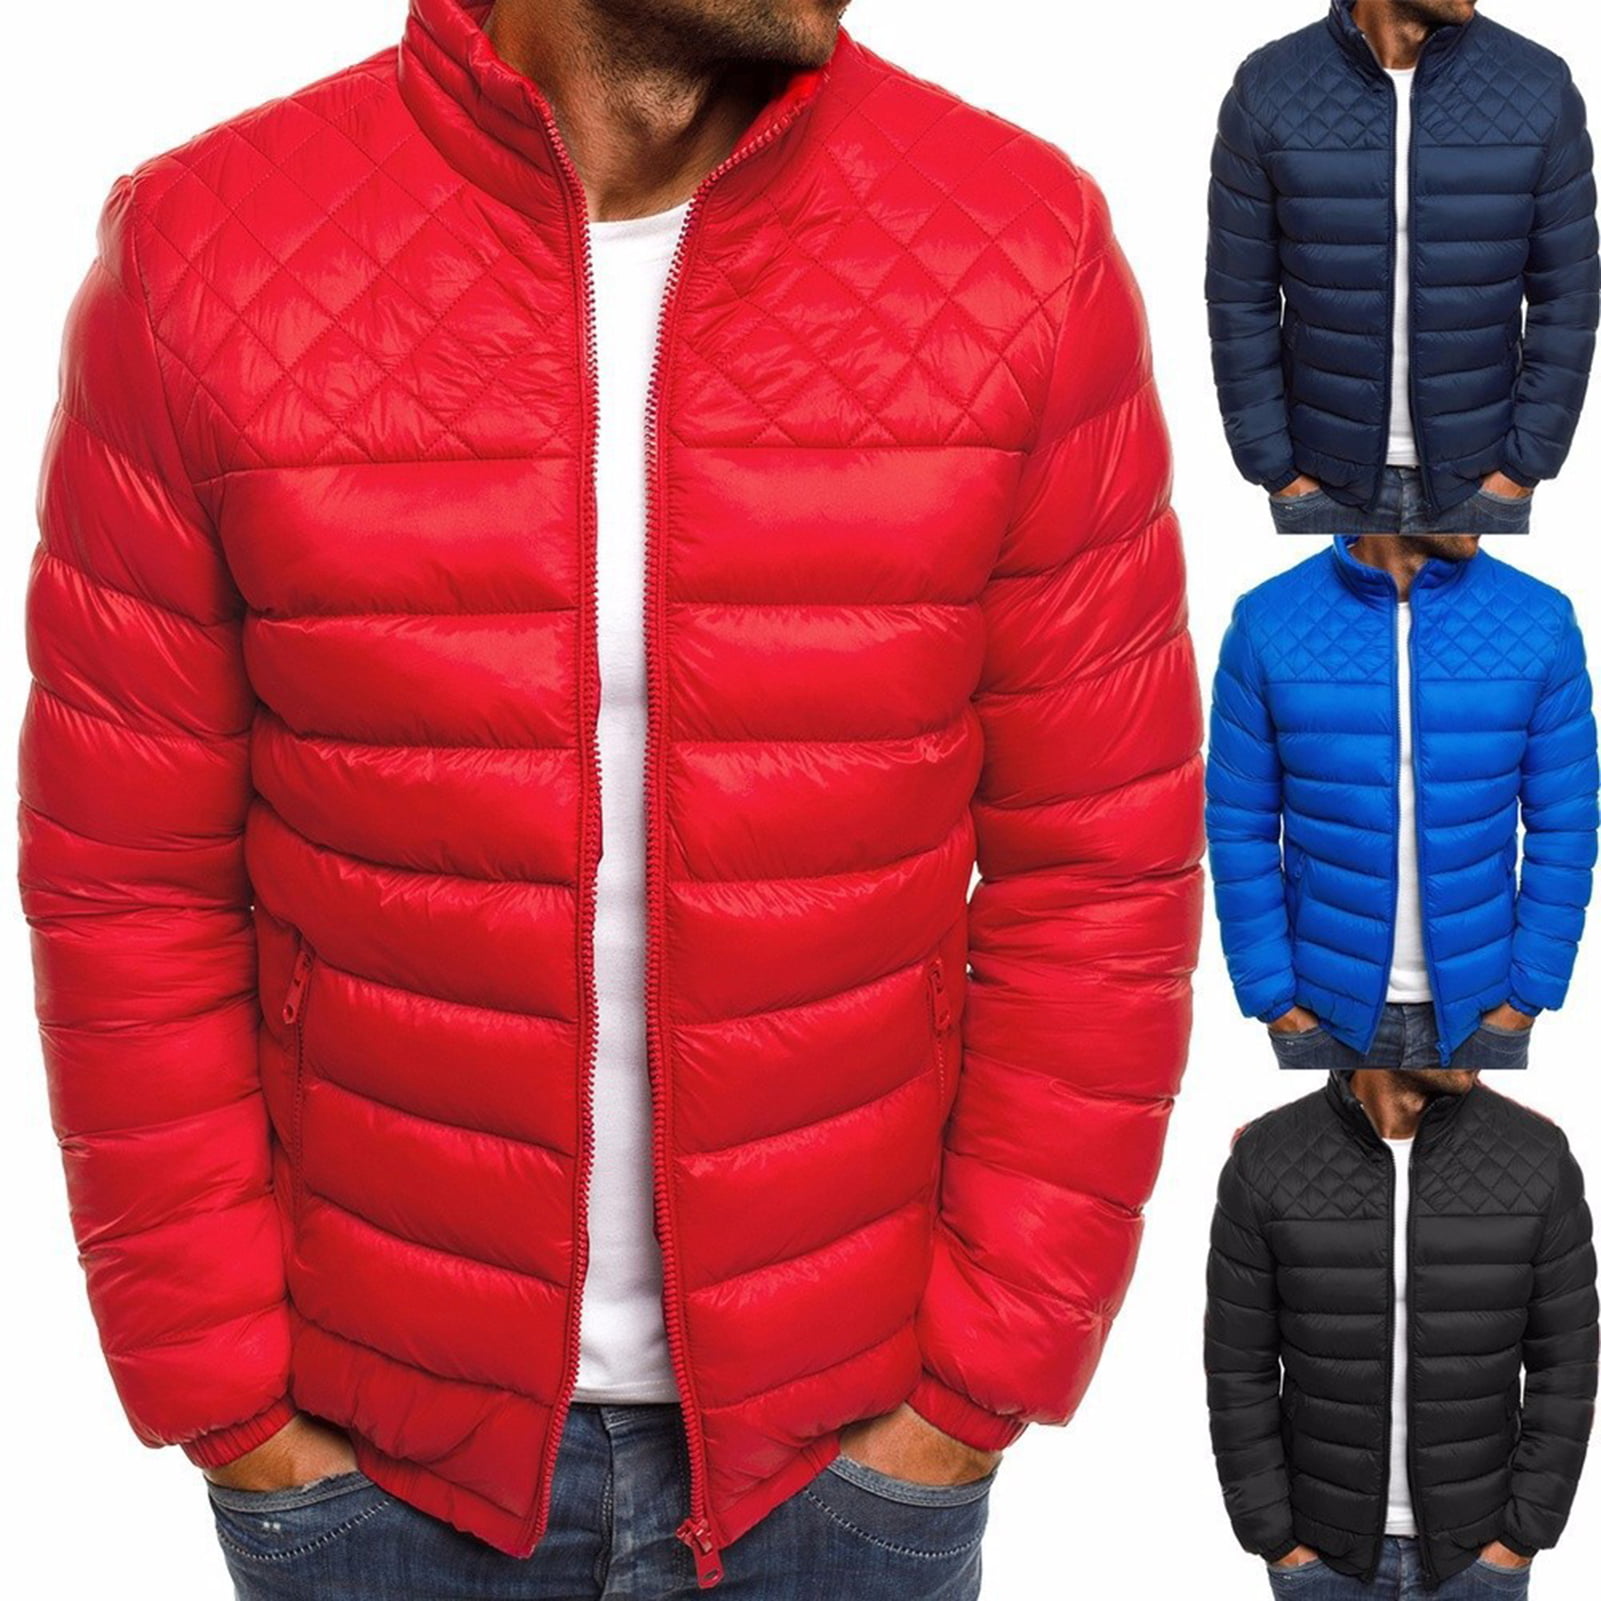 Winter Jacket Men Quilted Jackets Stand Collar Cotton Padded Thick Warm Coast for Man Outwear